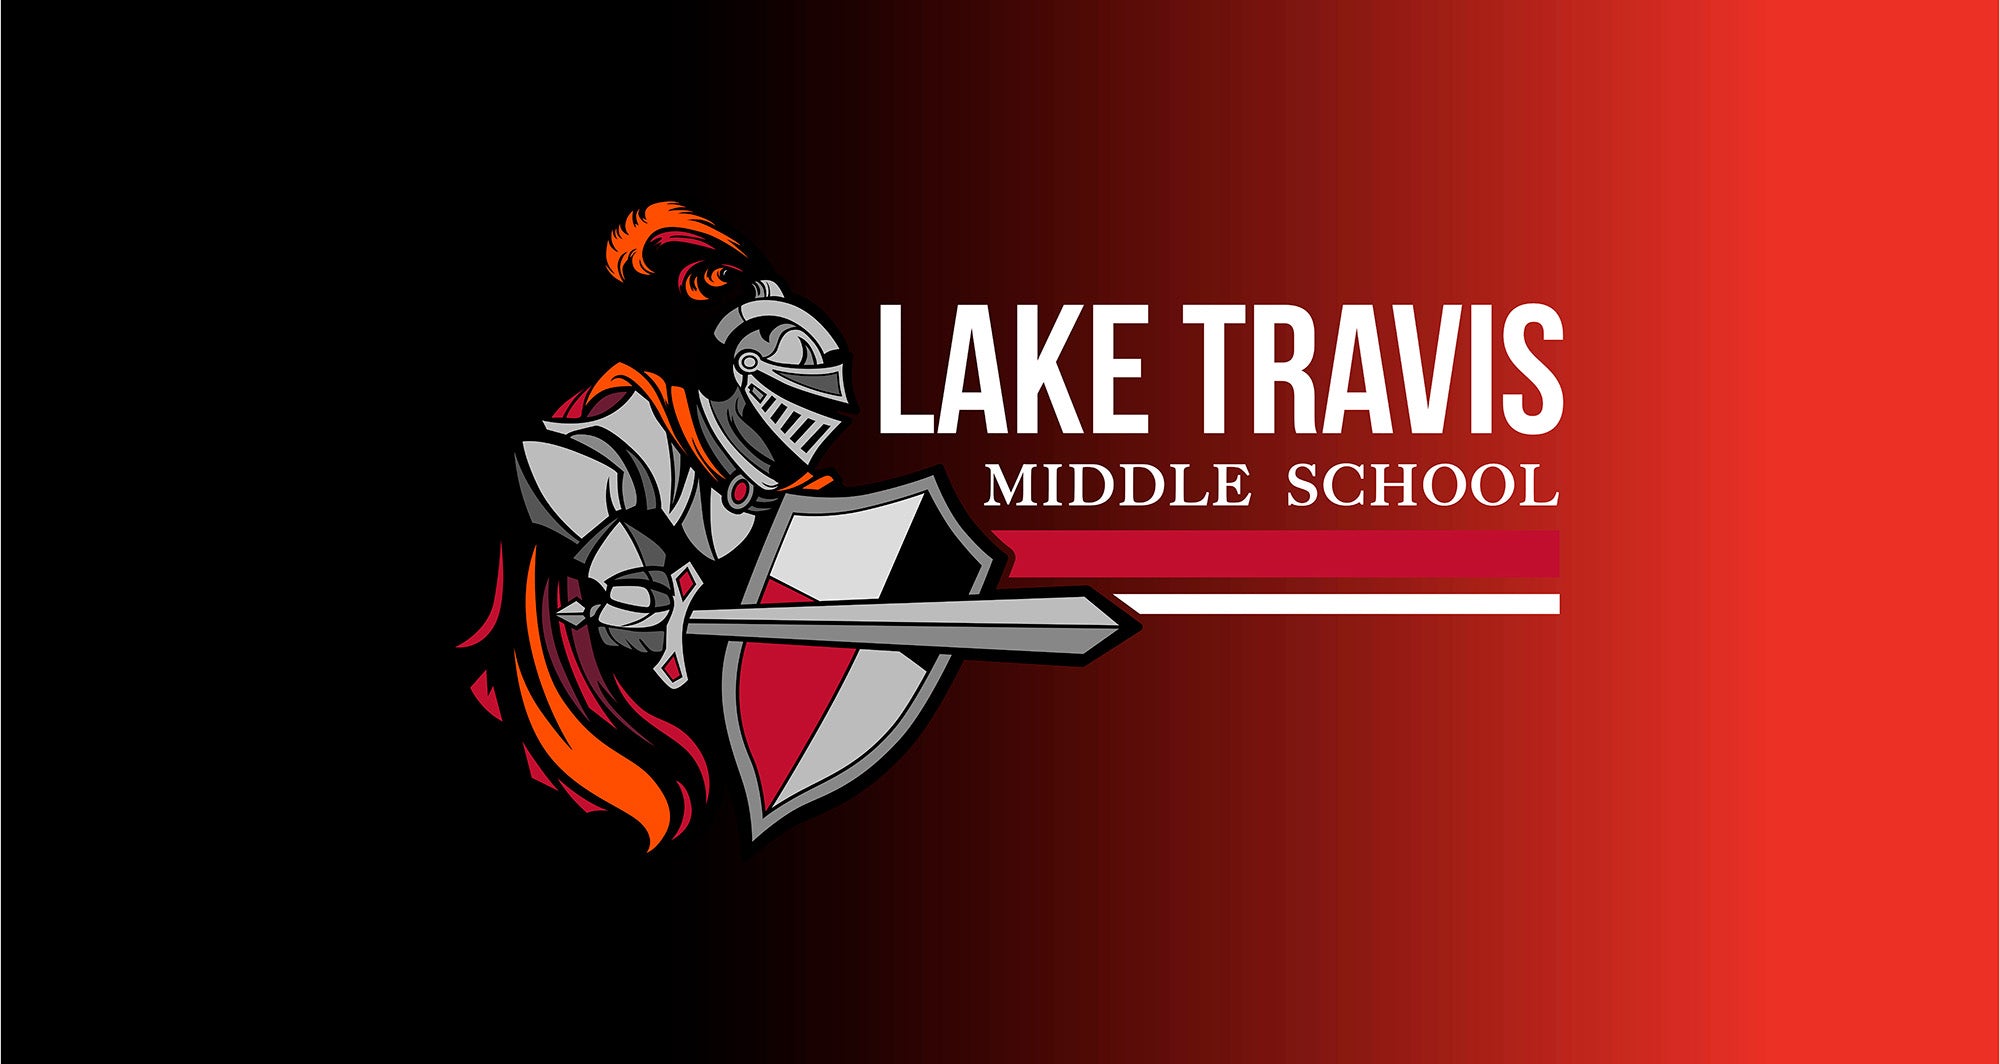 Red and black gradient background with a cavalier for Lake Travis Middle School in the center. 